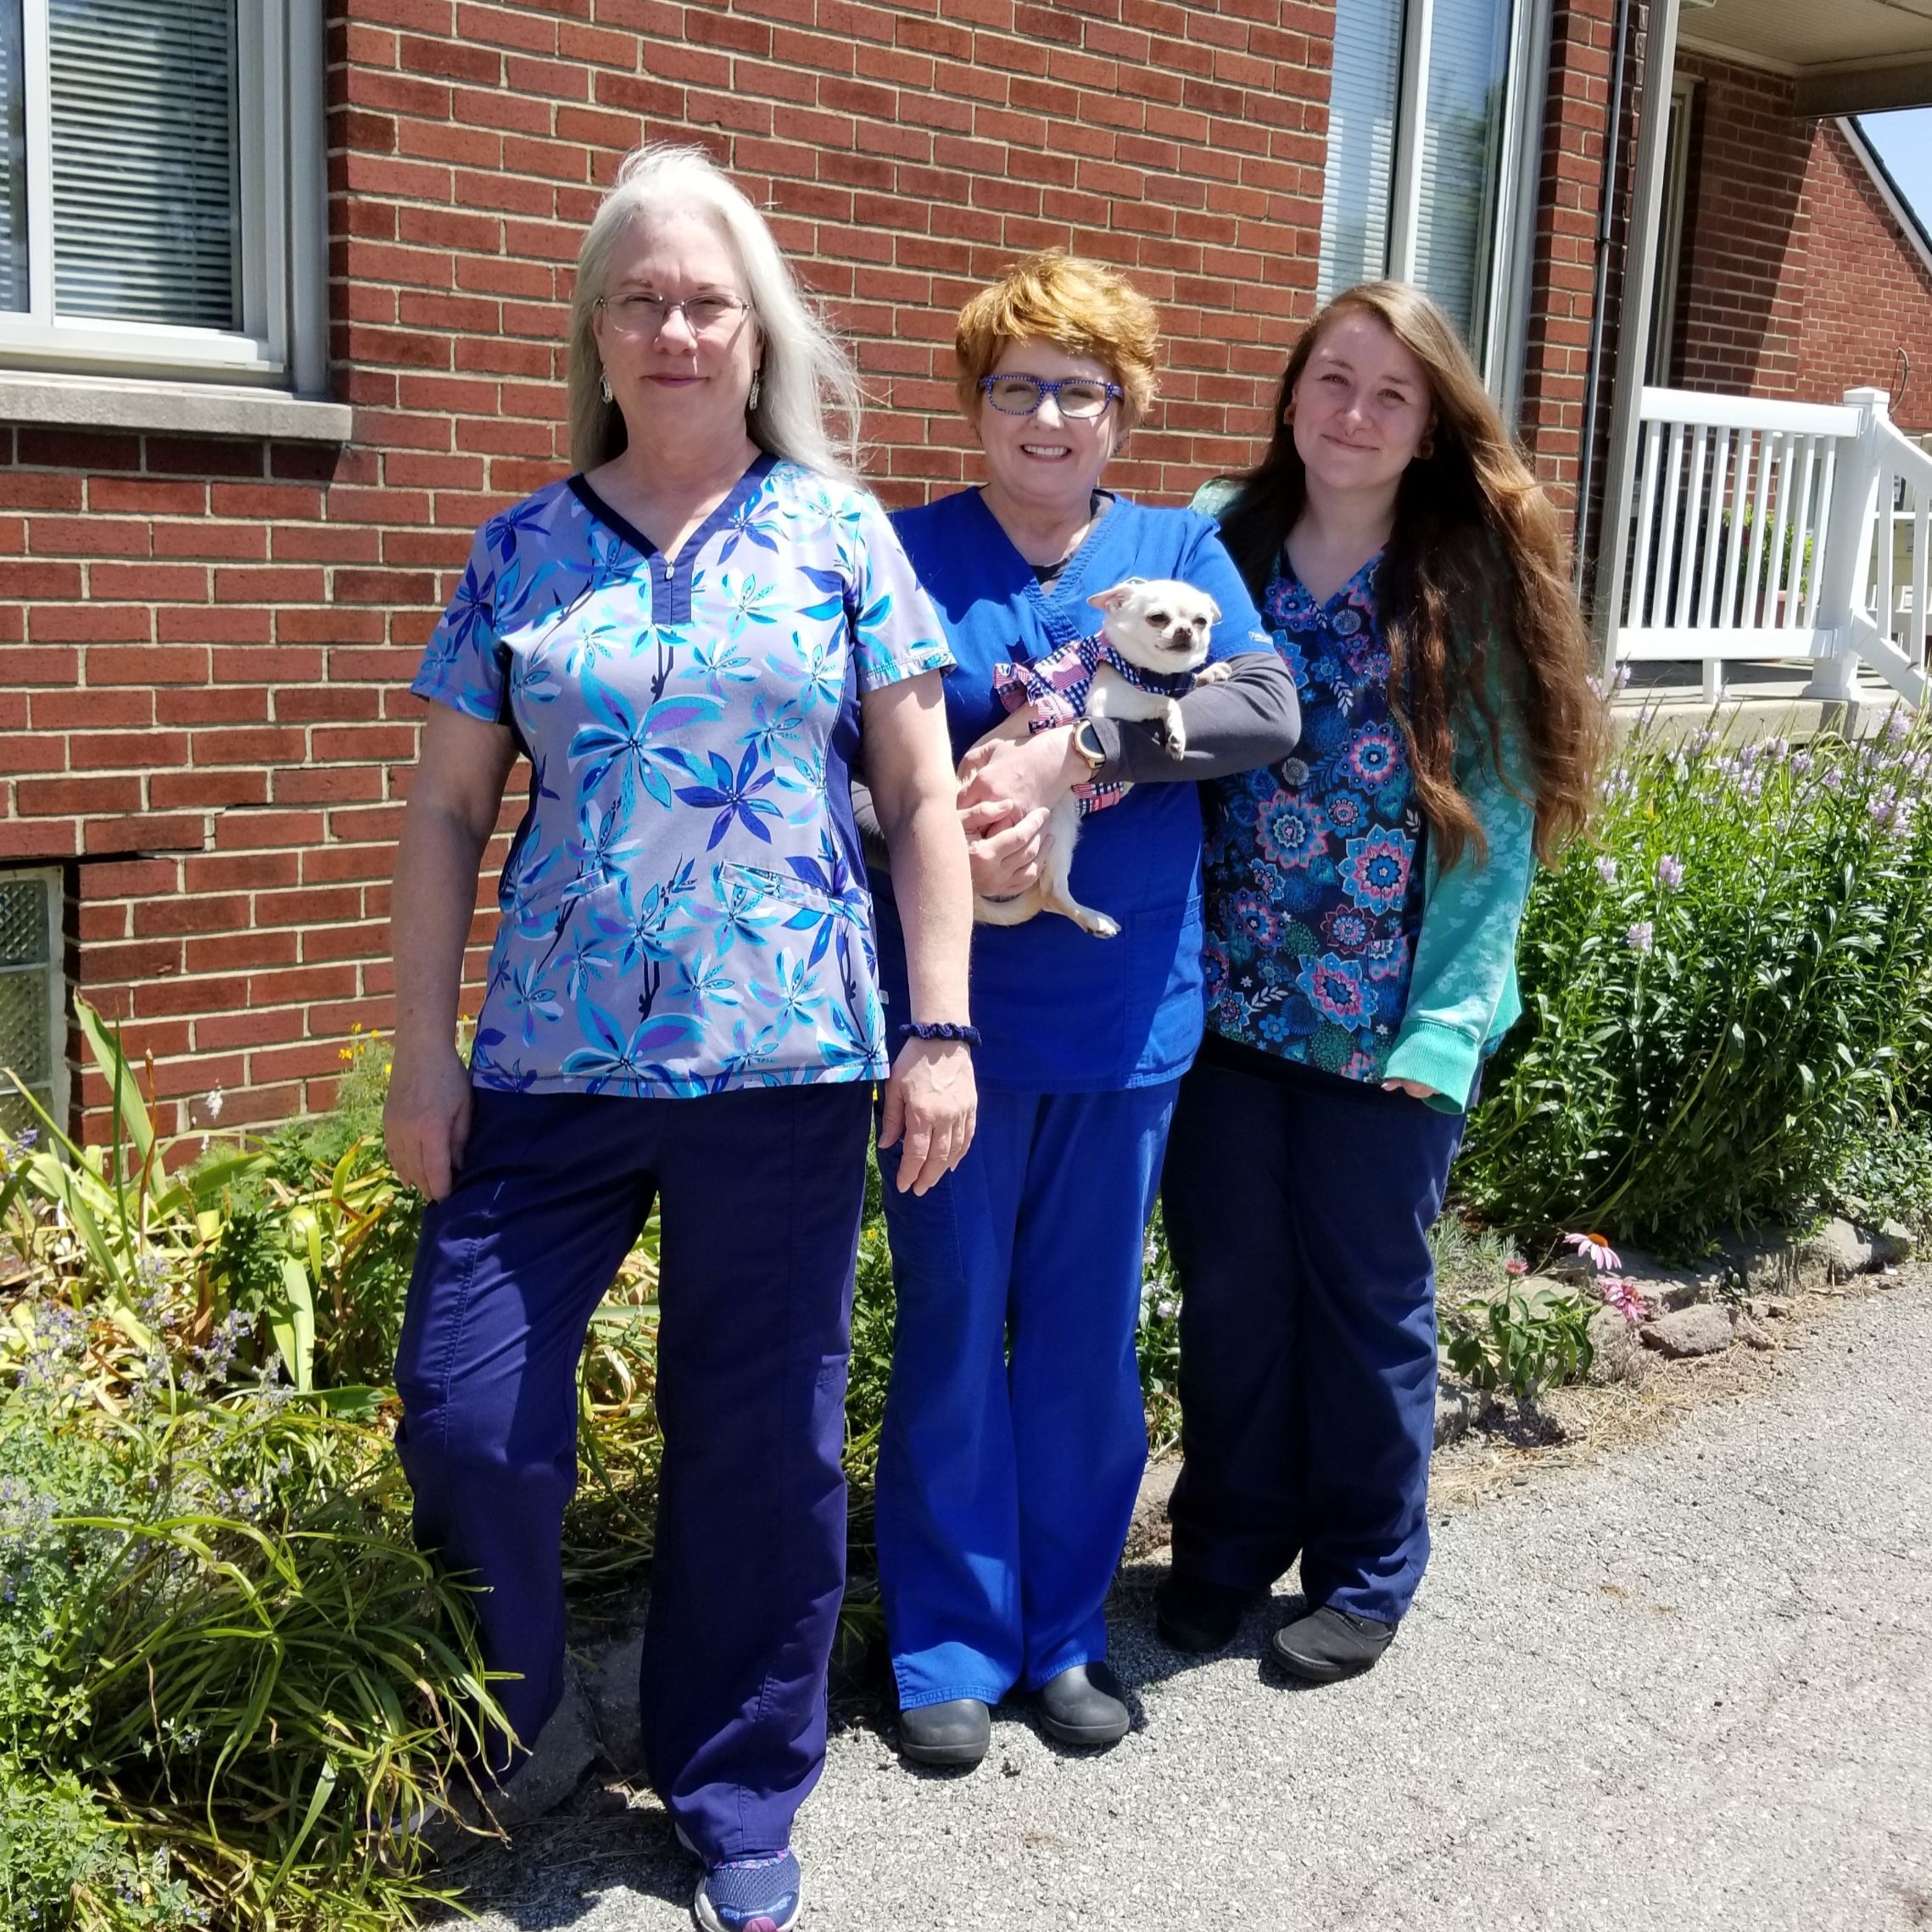 For nearly 40 years, Morse Road Veterinary Clinic has been providing outstanding, quality veterinary services to Columbus, OH, and the surrounding area.